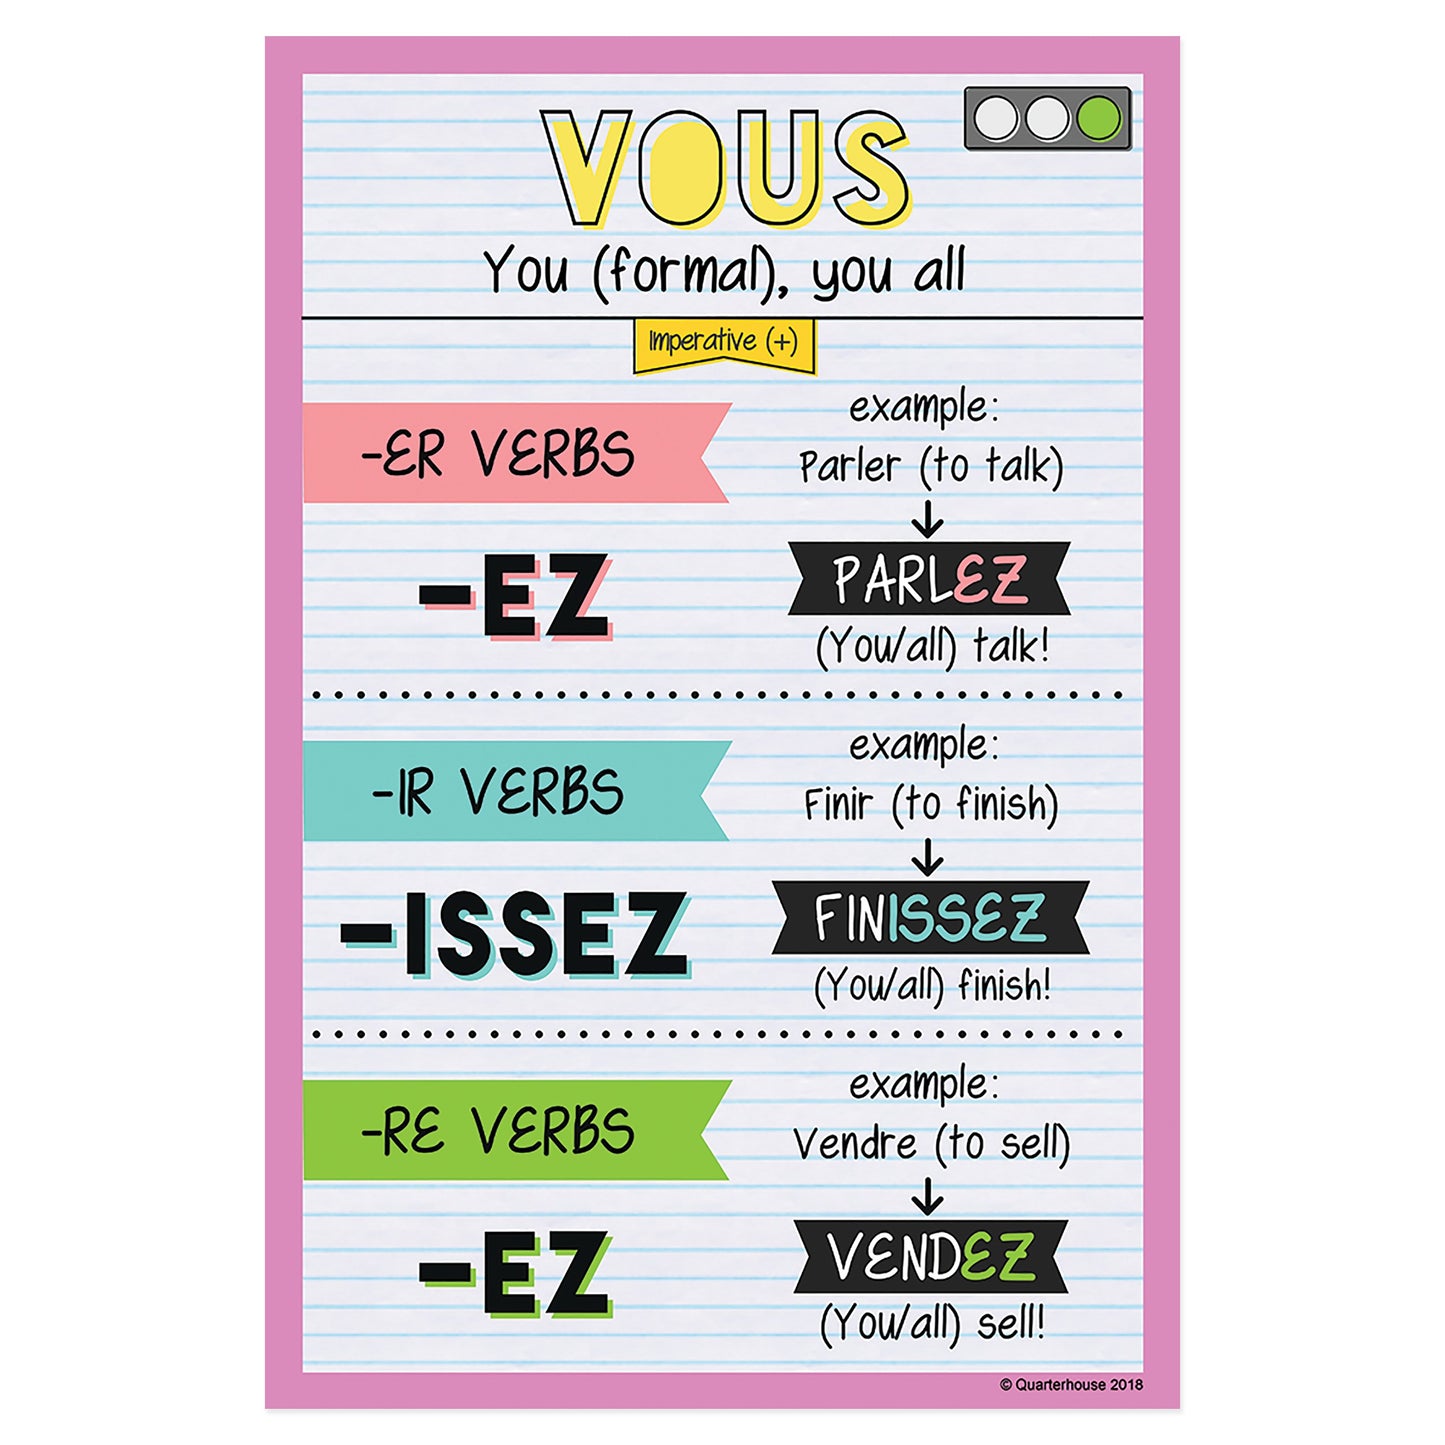 Quarterhouse Vous - Imperative Tense French Verb Conjugation Poster, French and ESL Classroom Materials for Teachers